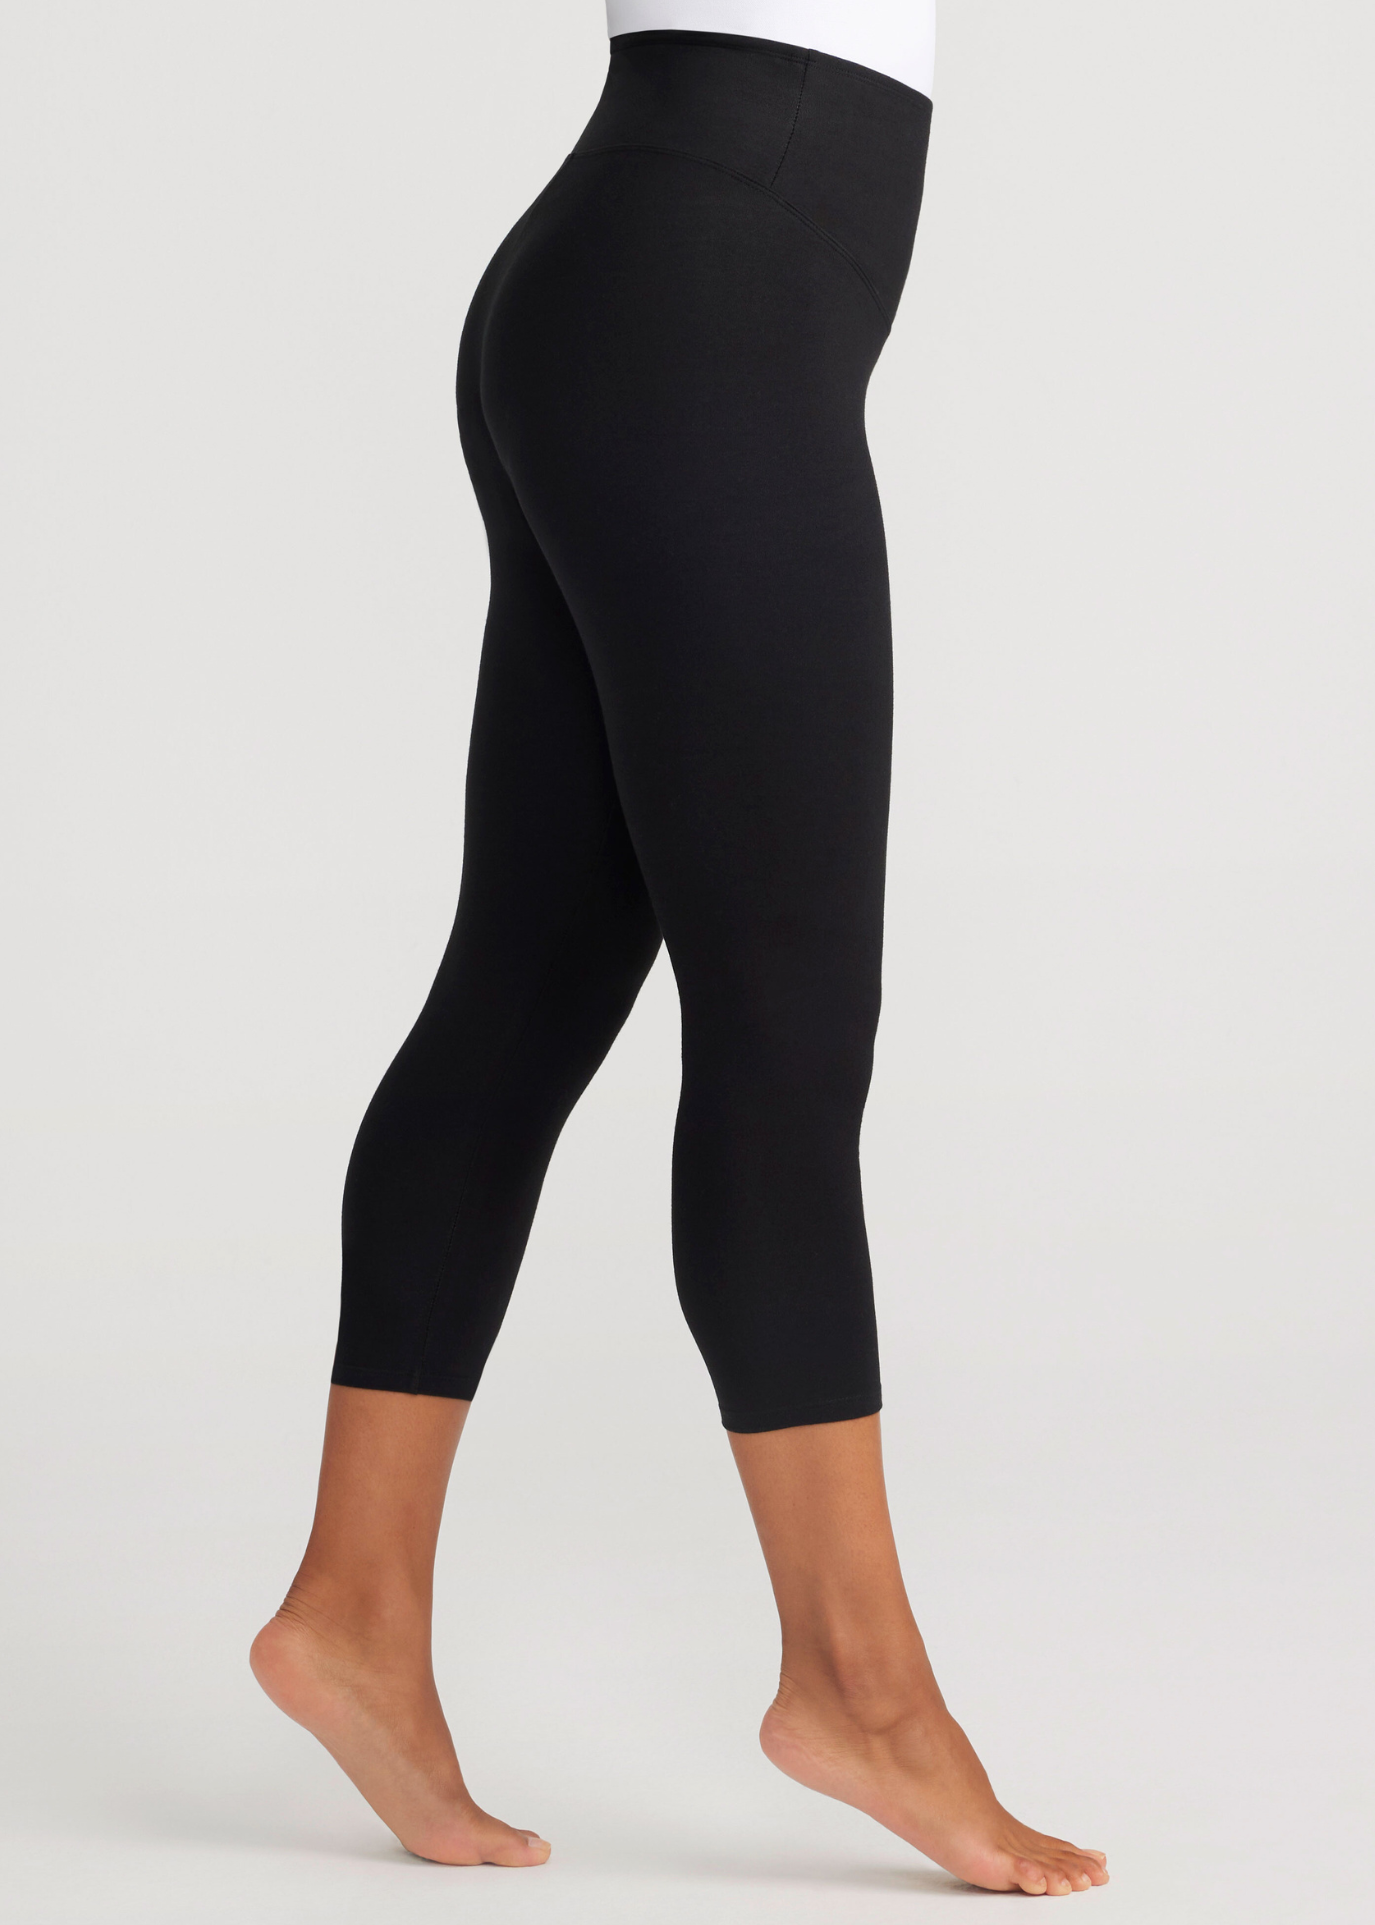 Clothing & Shoes - Bottoms - Leggings - Yummie® Poppy Active 7/8 Legging -  Online Shopping for Canadians